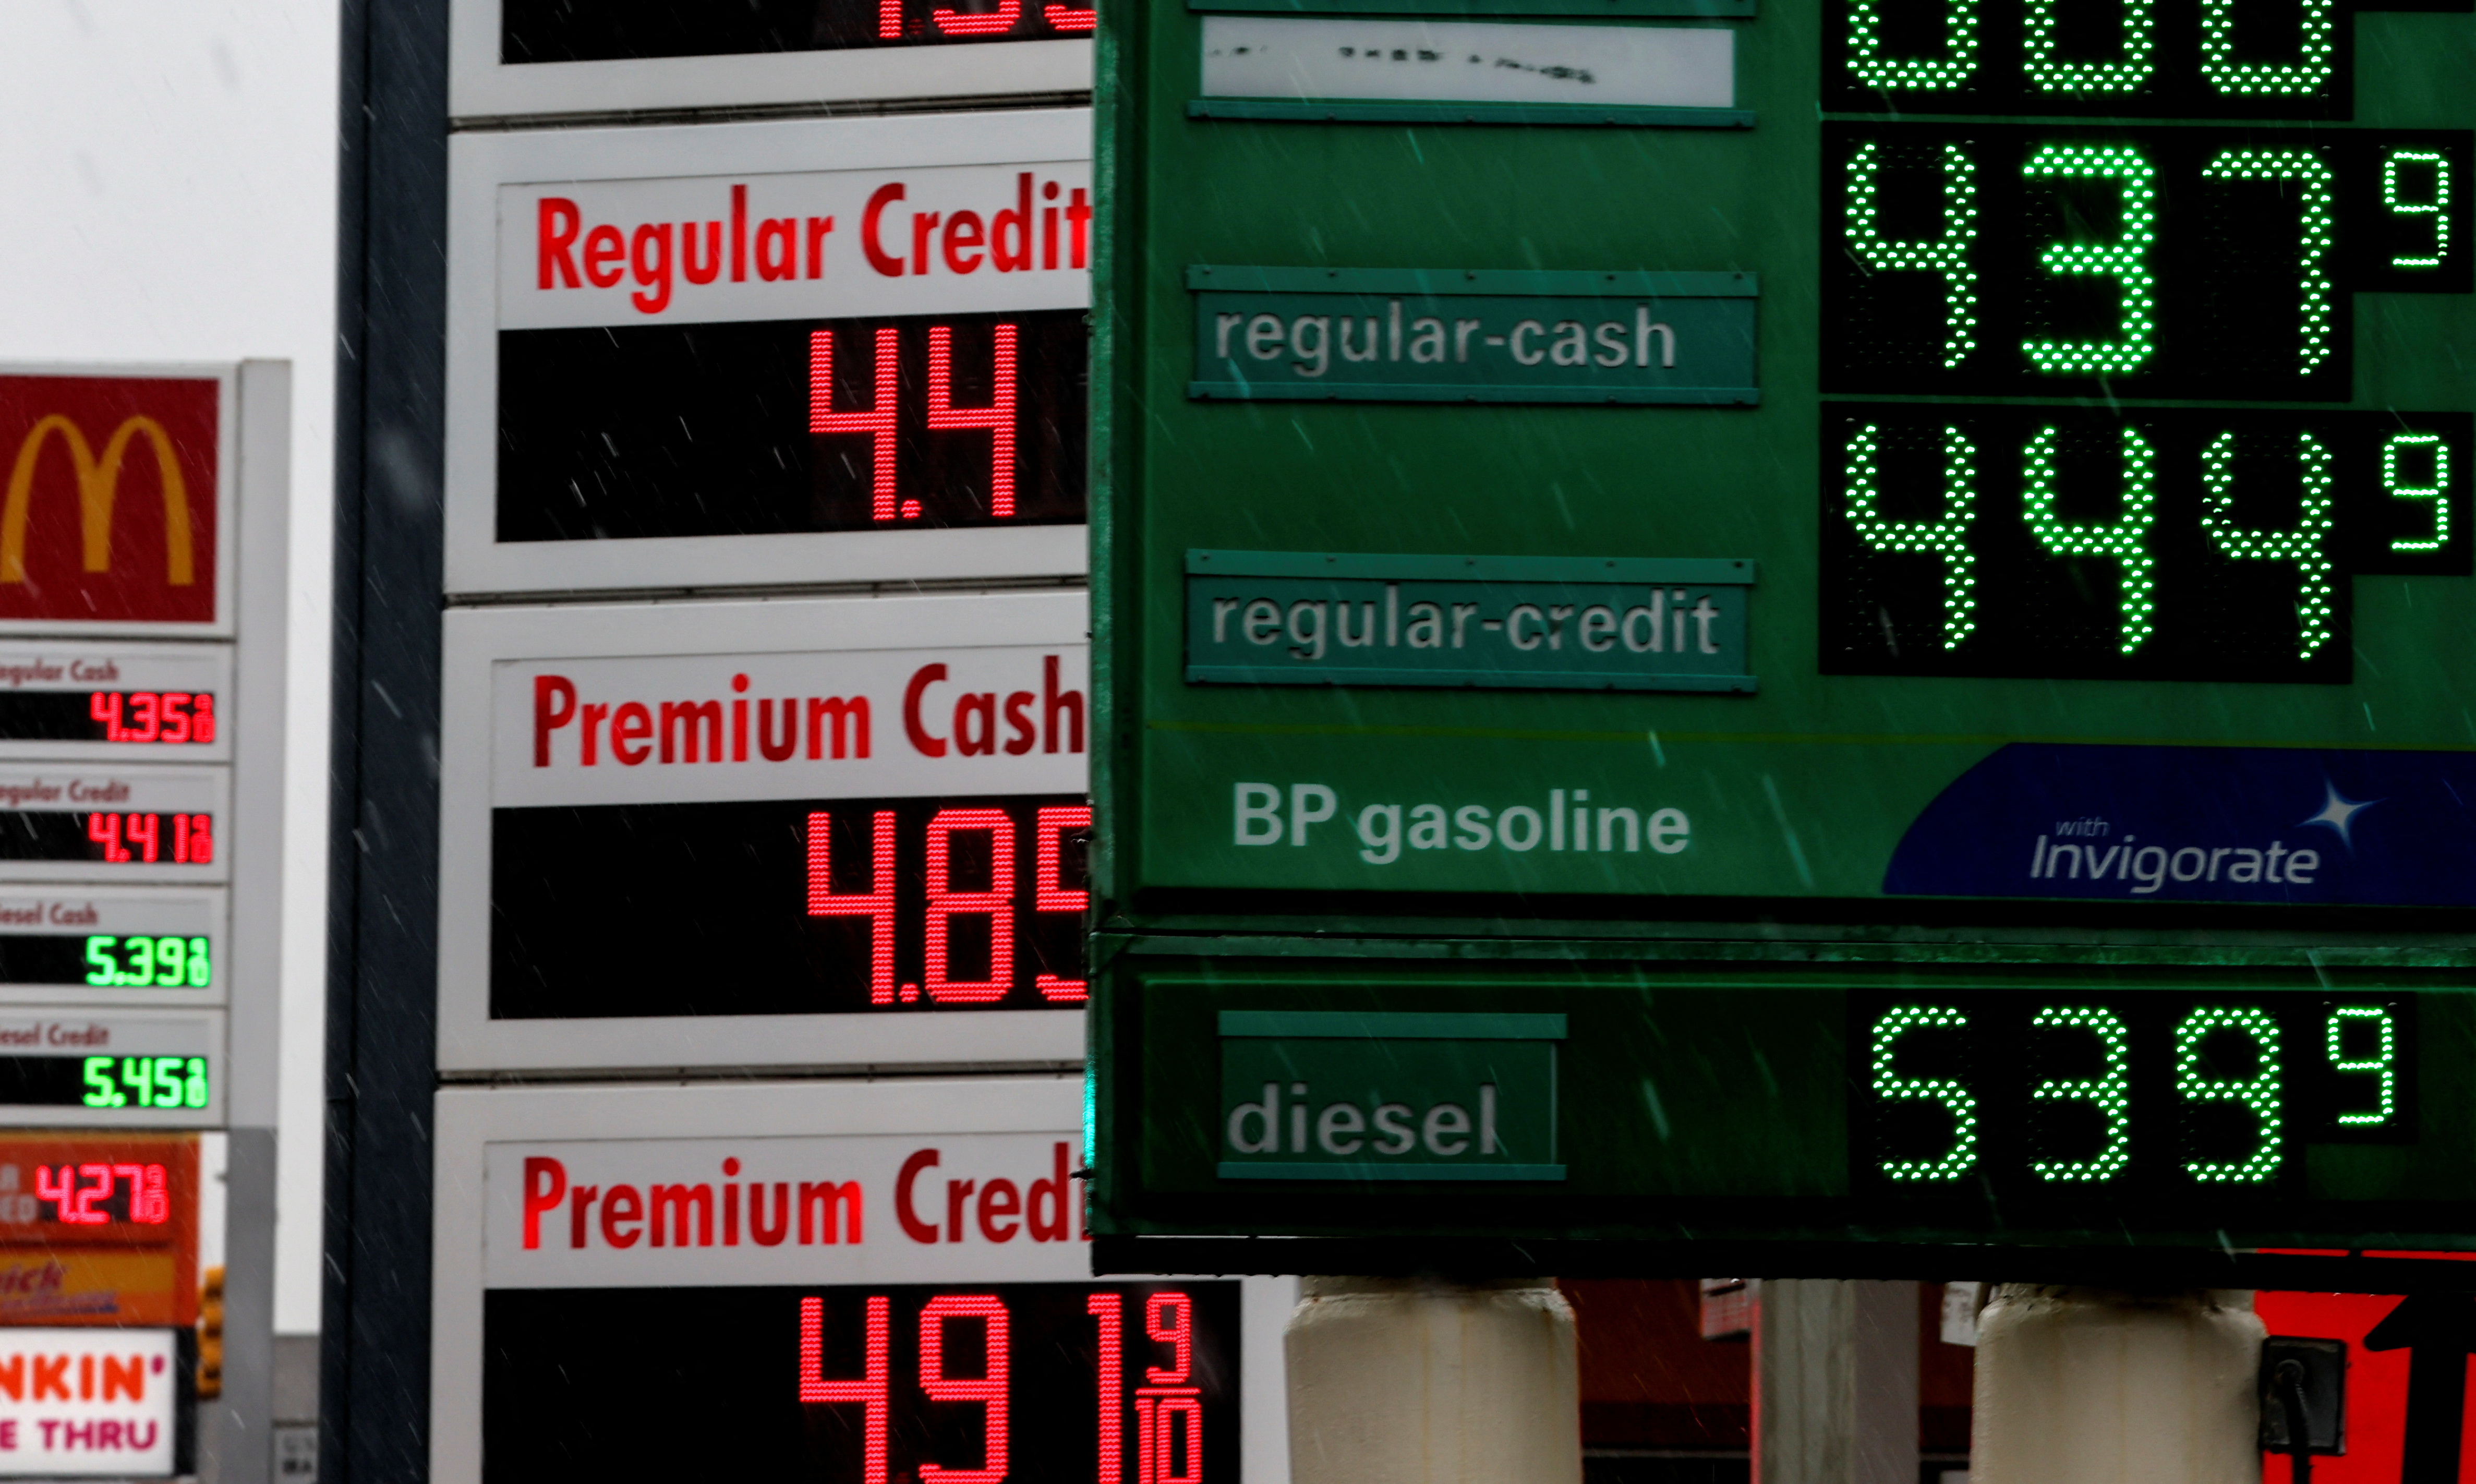 Gasoline prices are displayed at gas stations in Jersey City, New Jersey